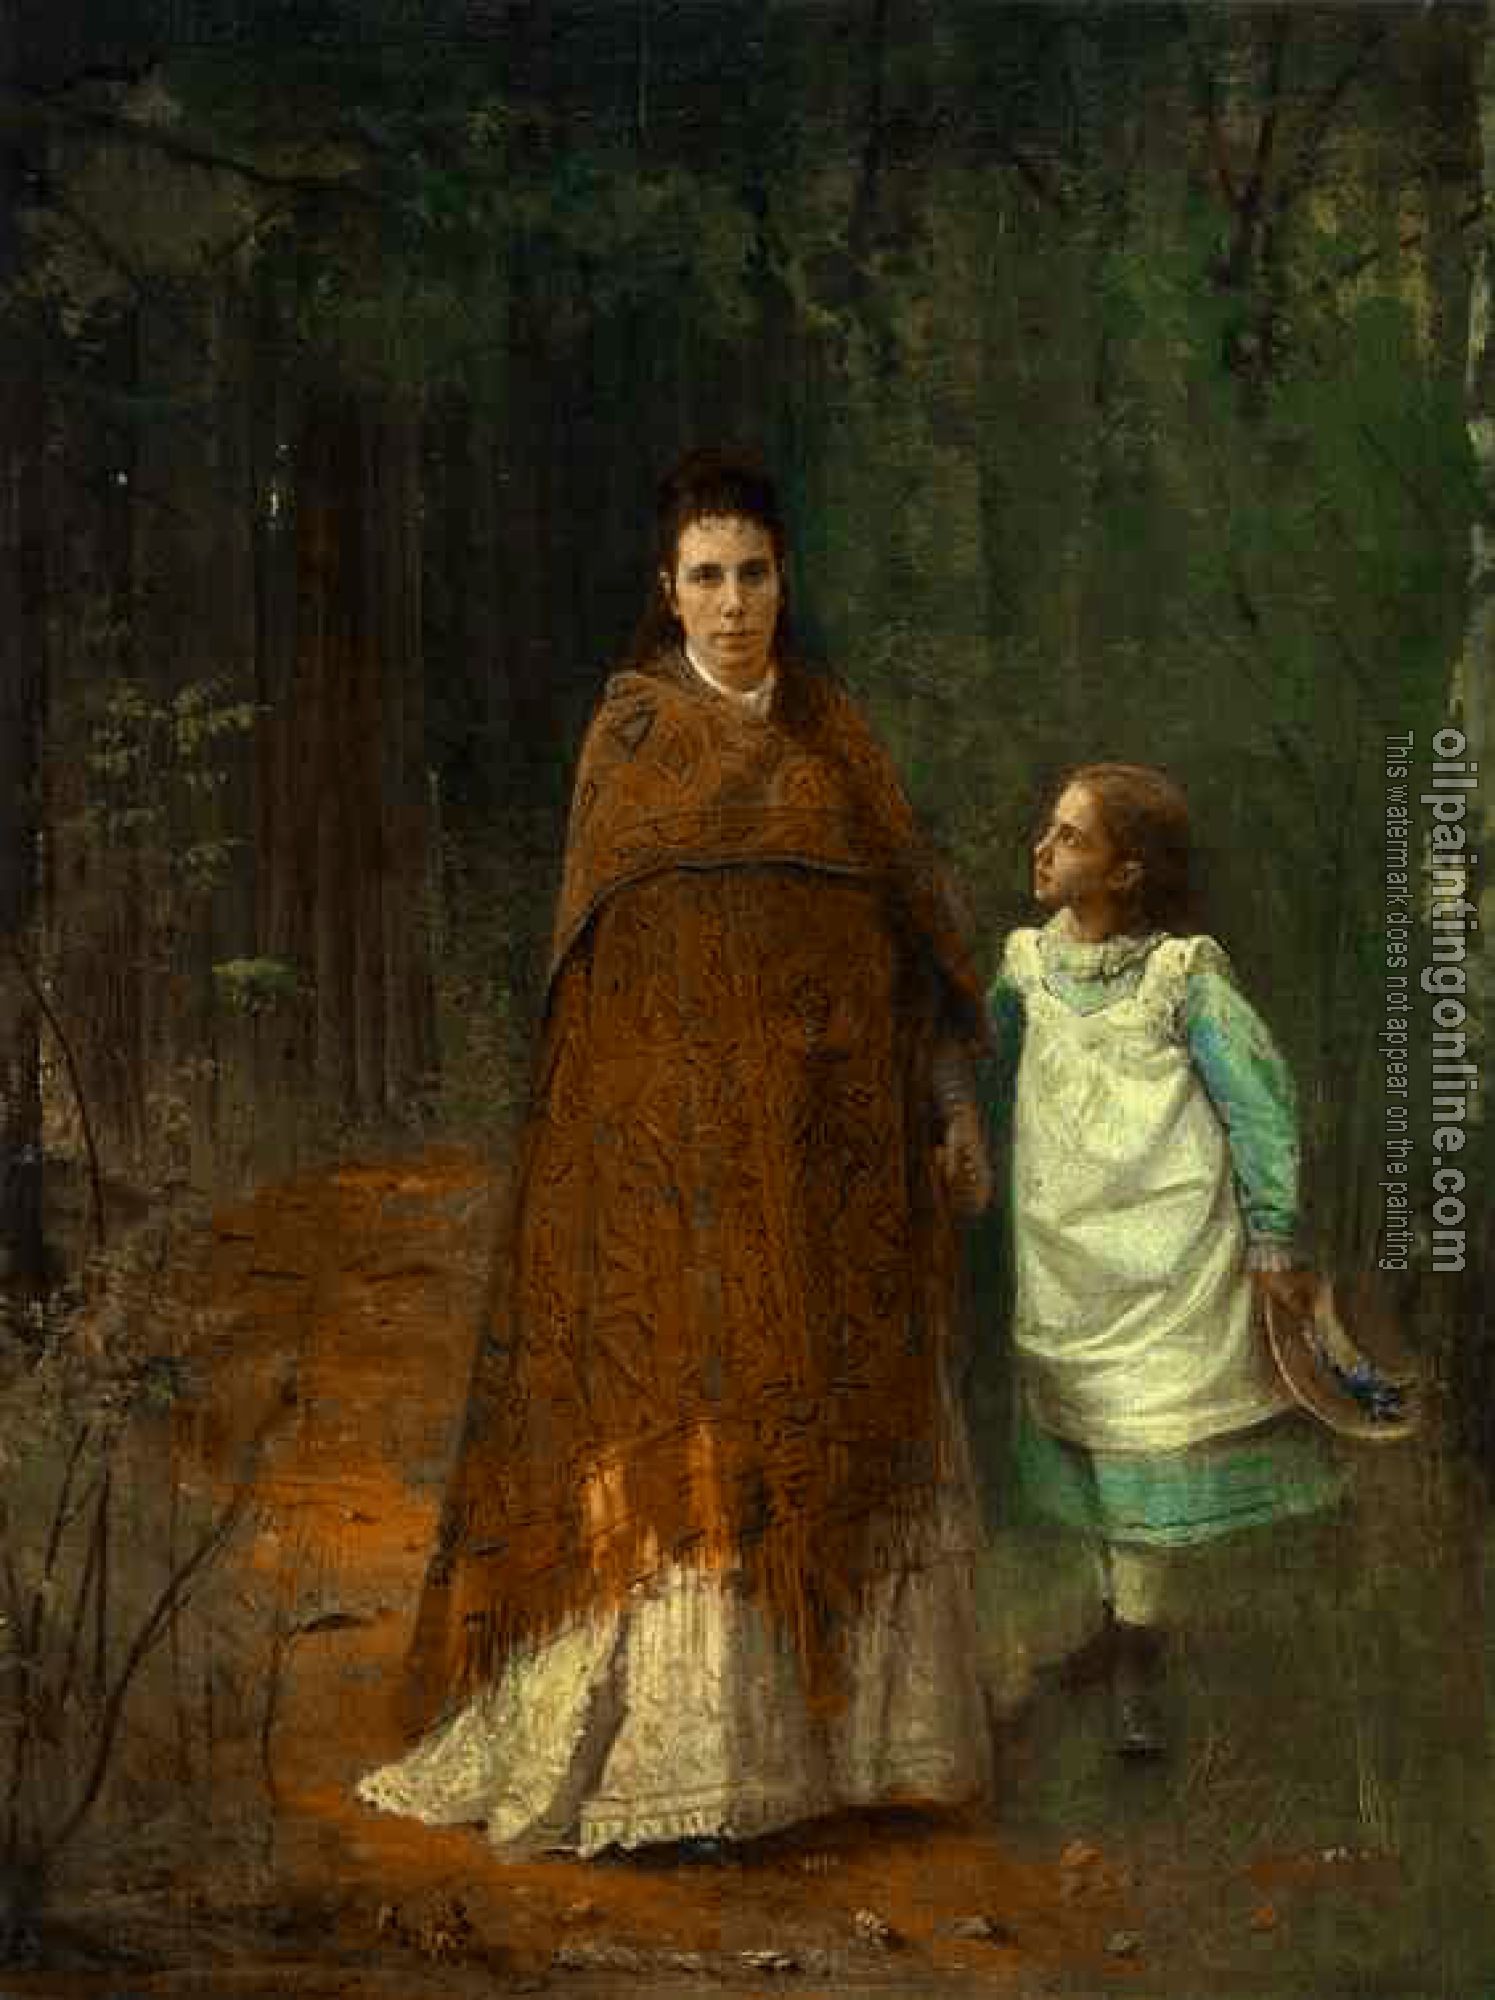 Ivan Nikolaevich Kramskoy - In the Park, Portrait of the Artist's Wife and Daughter